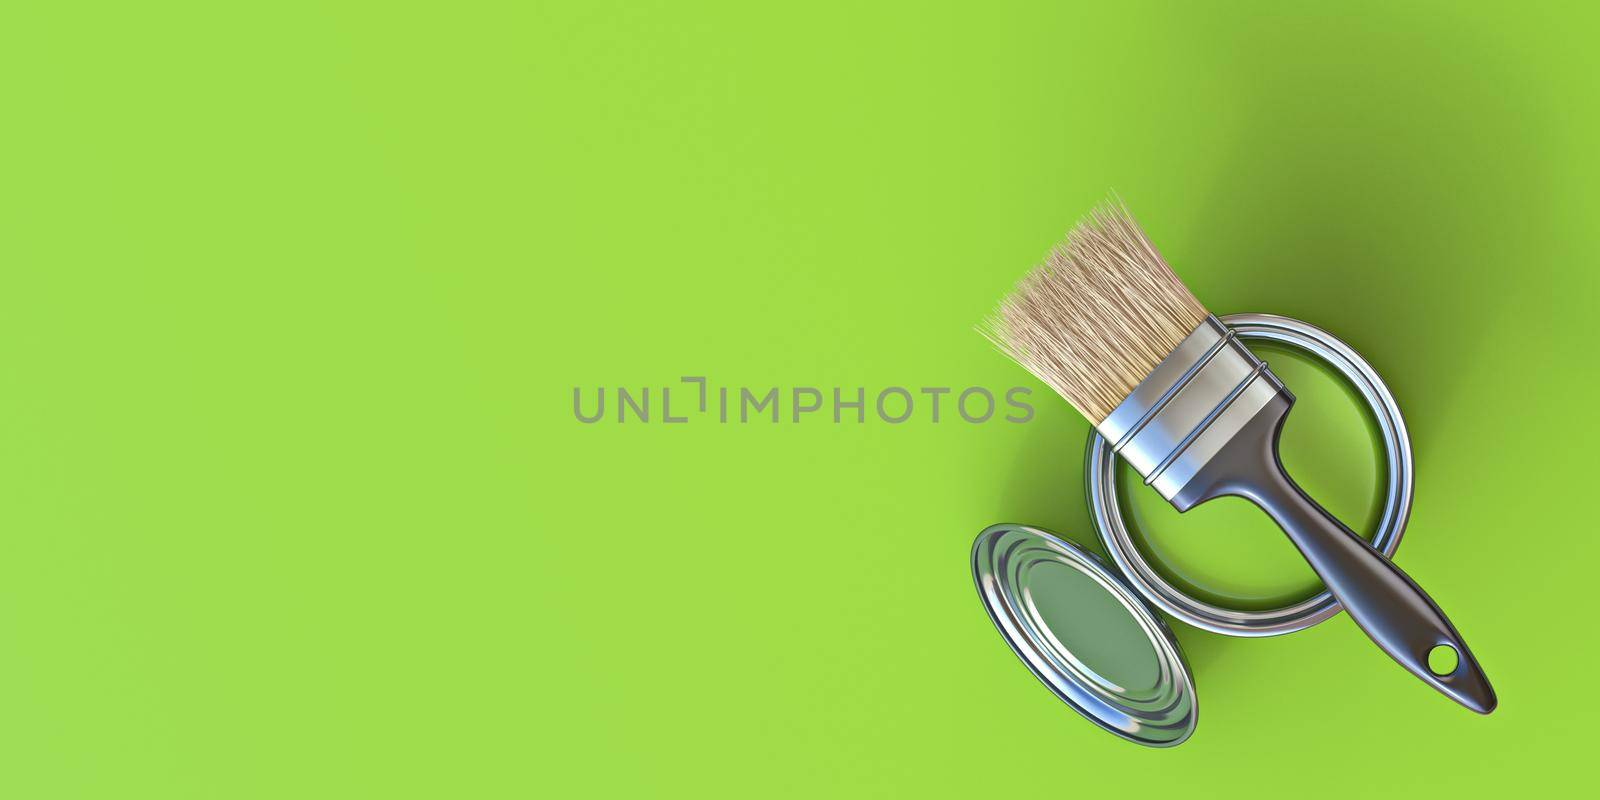 Paintbrush on top of paint bucket with green paint 3D rendering illustration isolated on green background